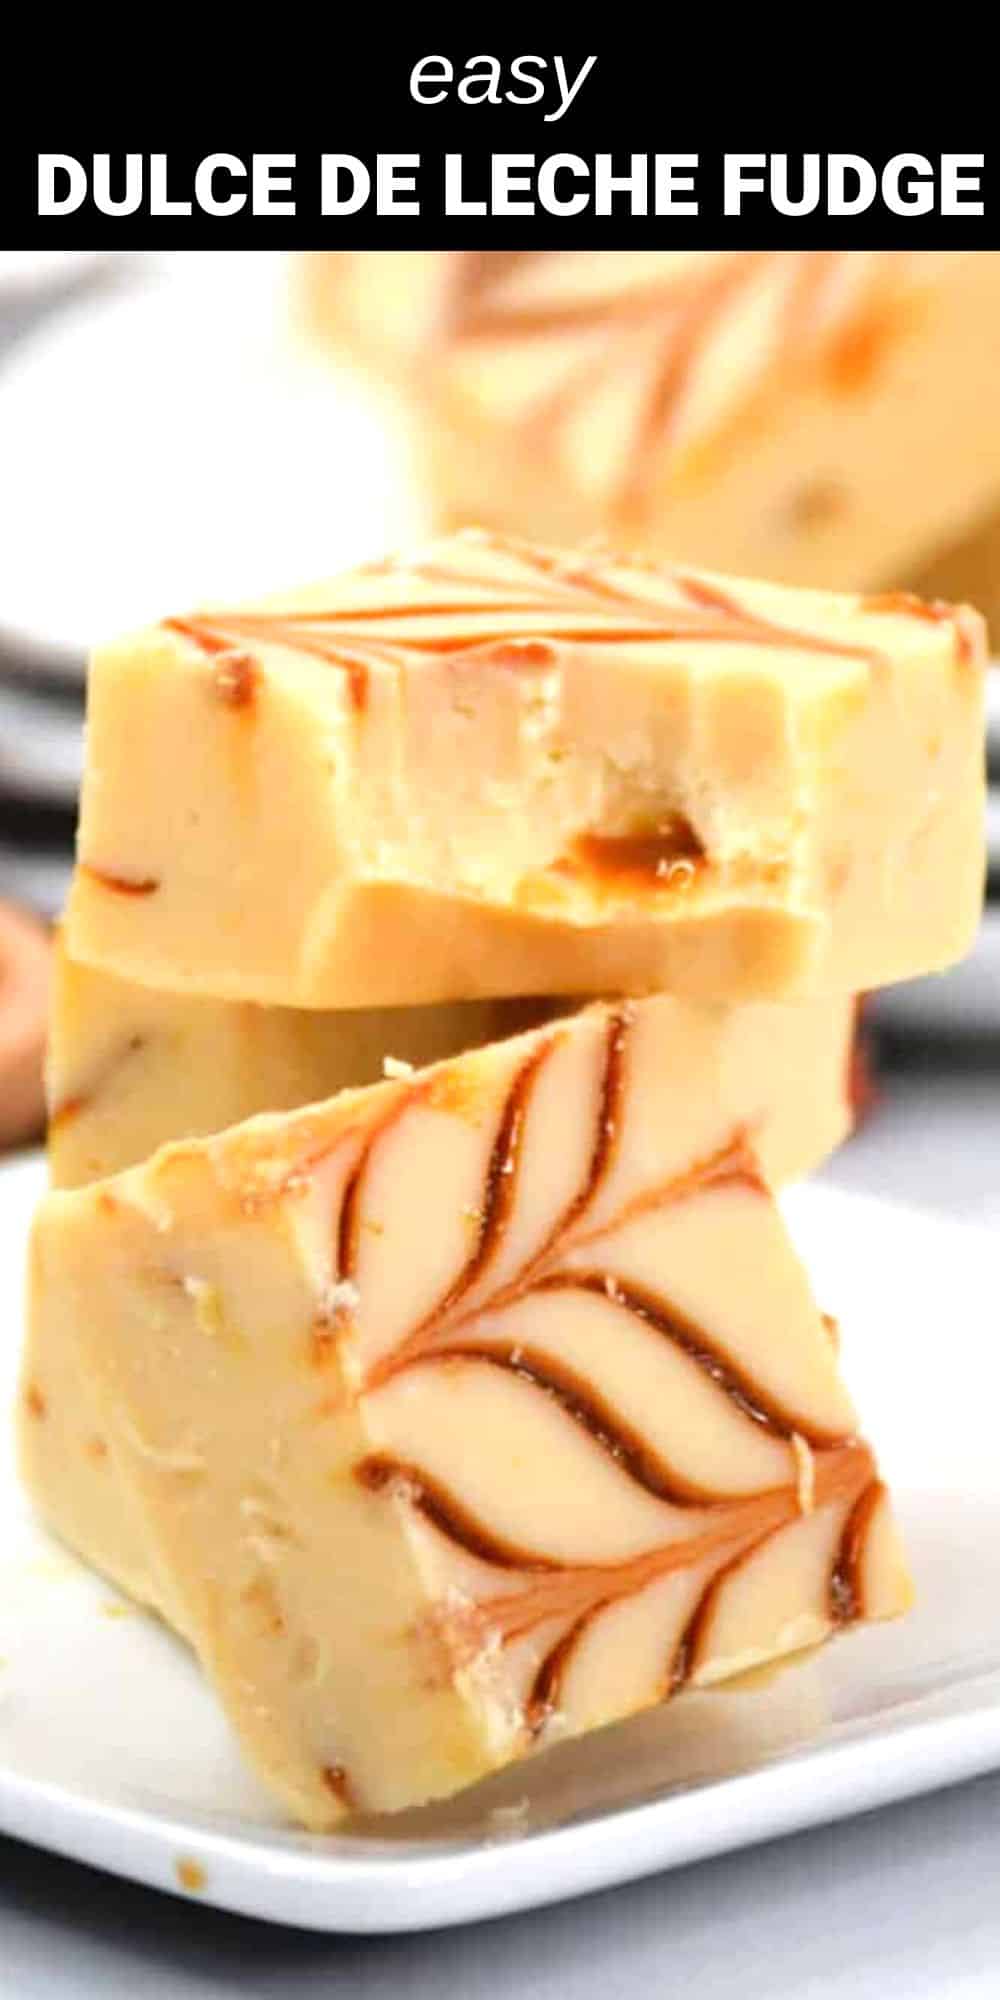 This dulce de leche fudge is a rich and indulgent treat with a unique and delicious flavor that sets it apart from other fudge recipes. Perfect for your next party, it’s an easy and crowd-pleasing recipe that’s sure to impress!